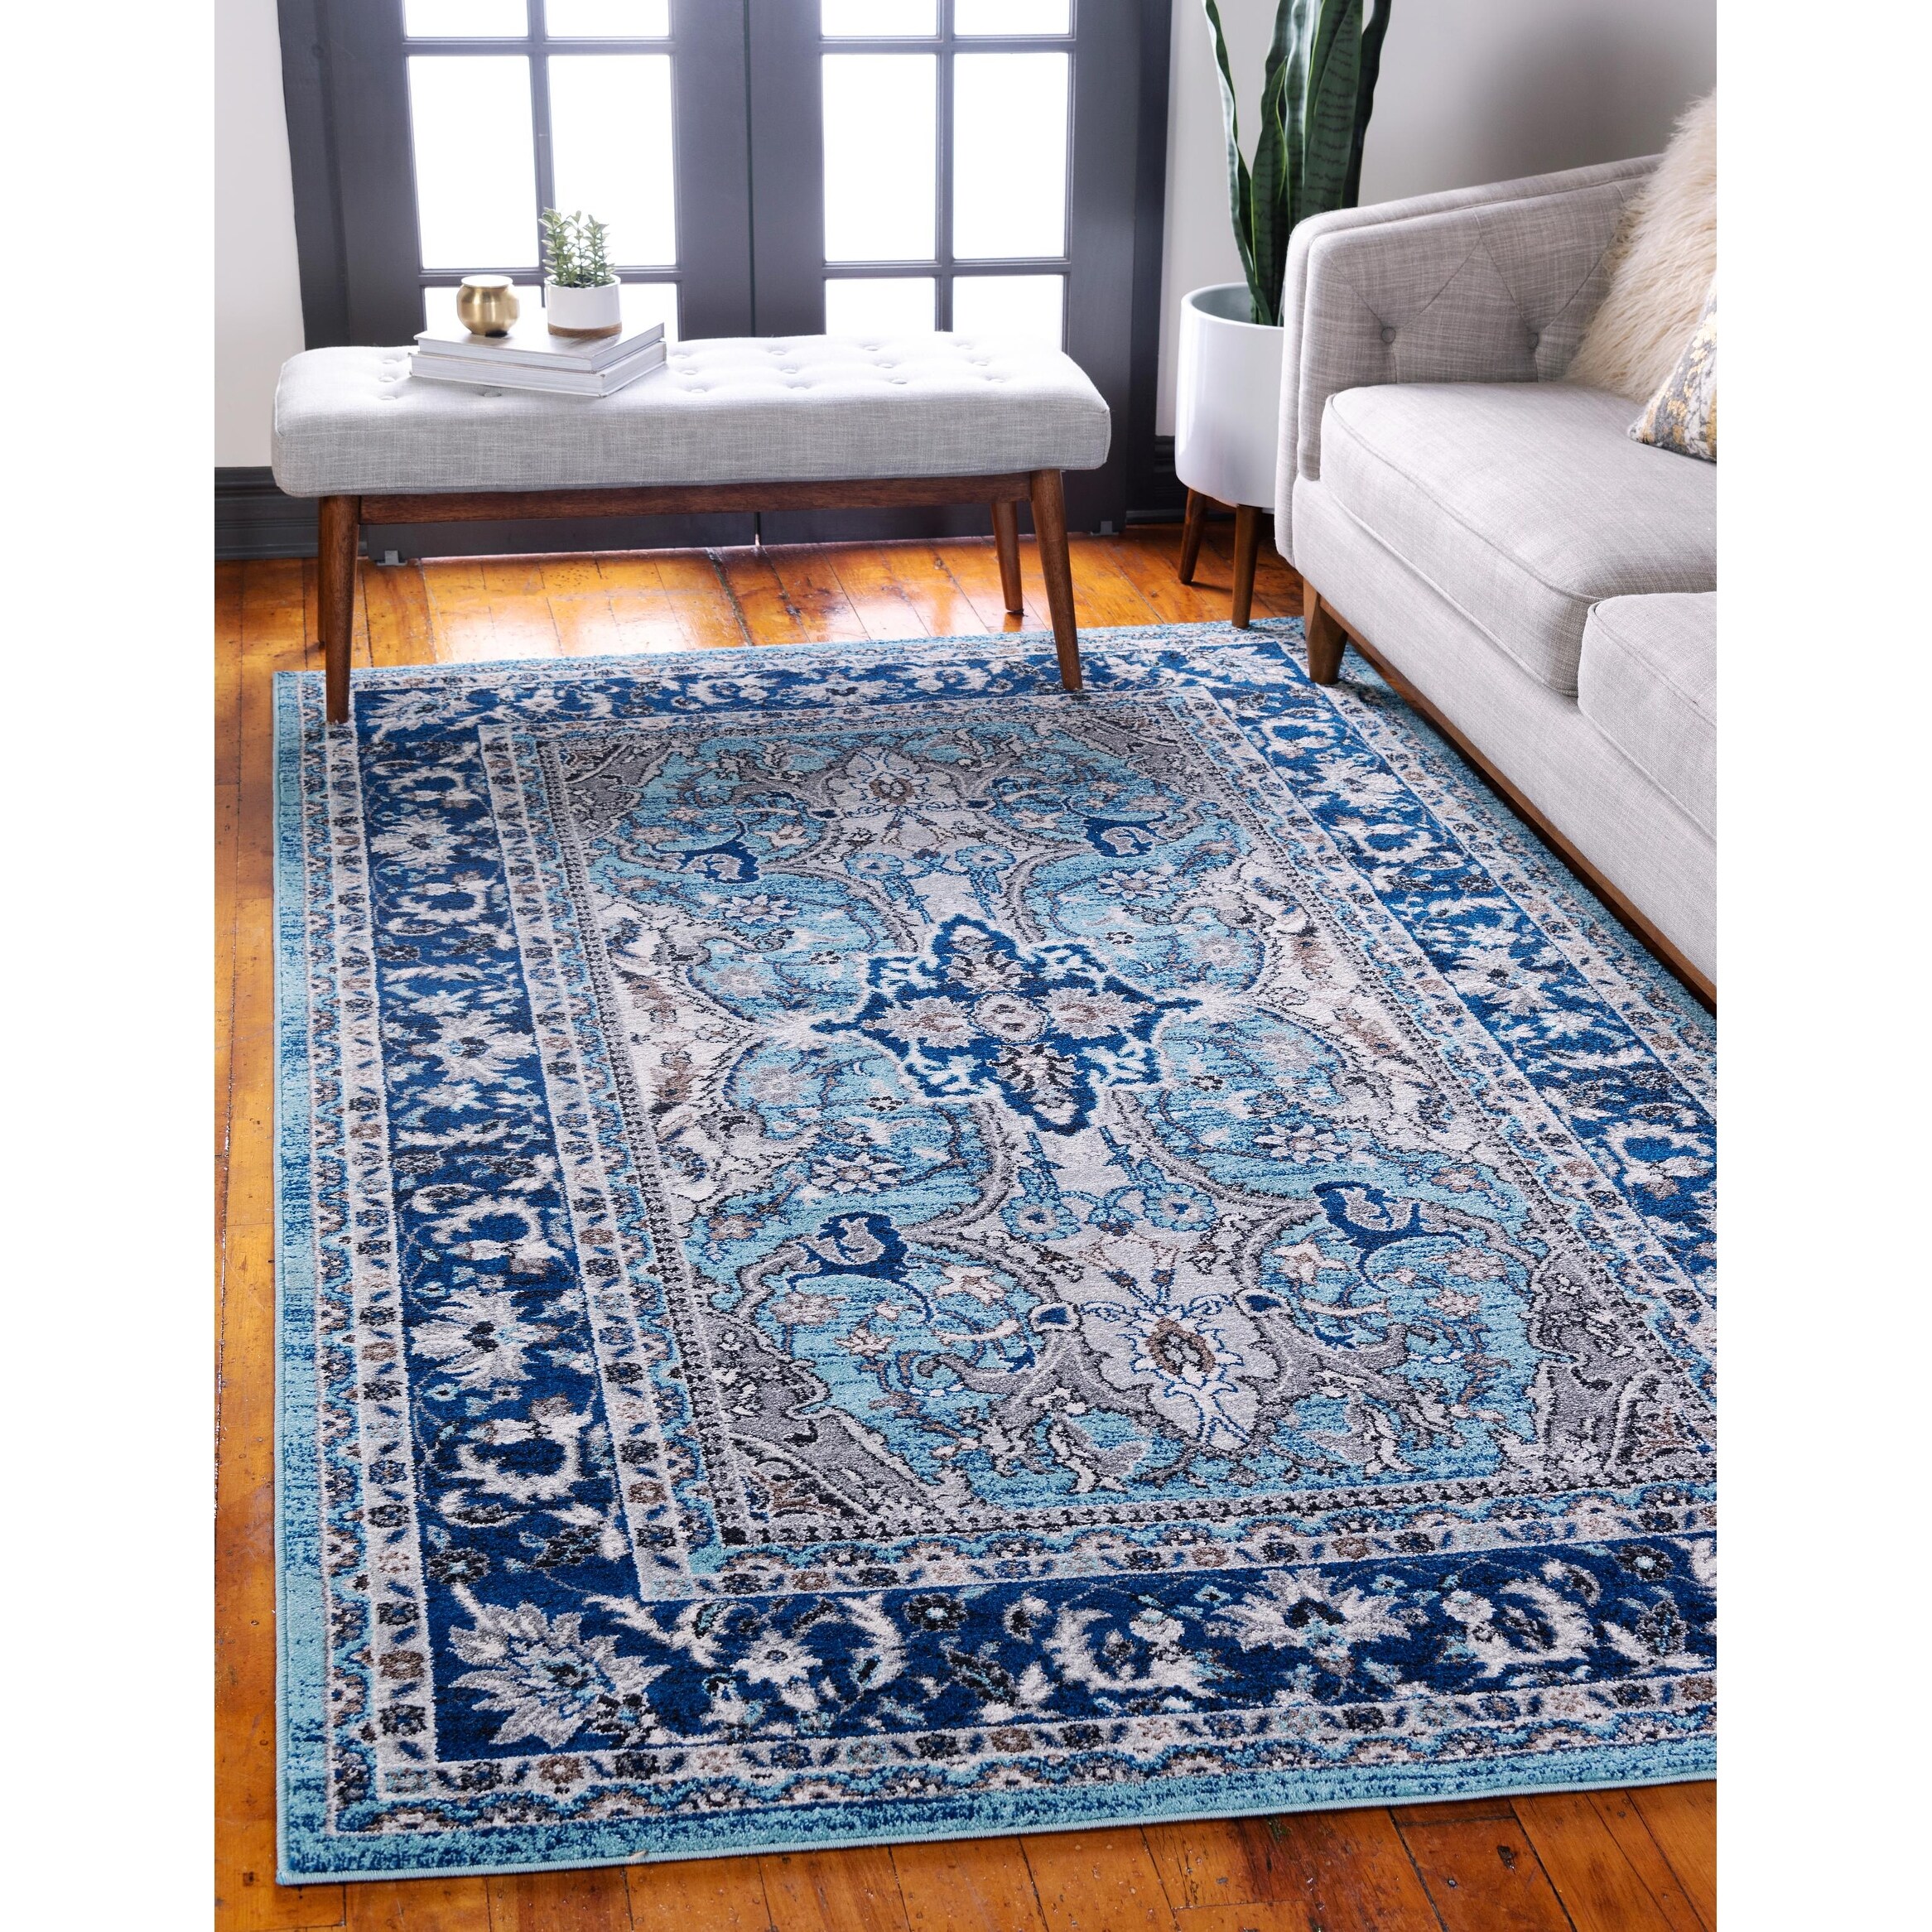 Unique Loom 3136234 Traditional Over-Dyed Vintage Area Rug Turquoise/Ivory 8 x 10 ft 